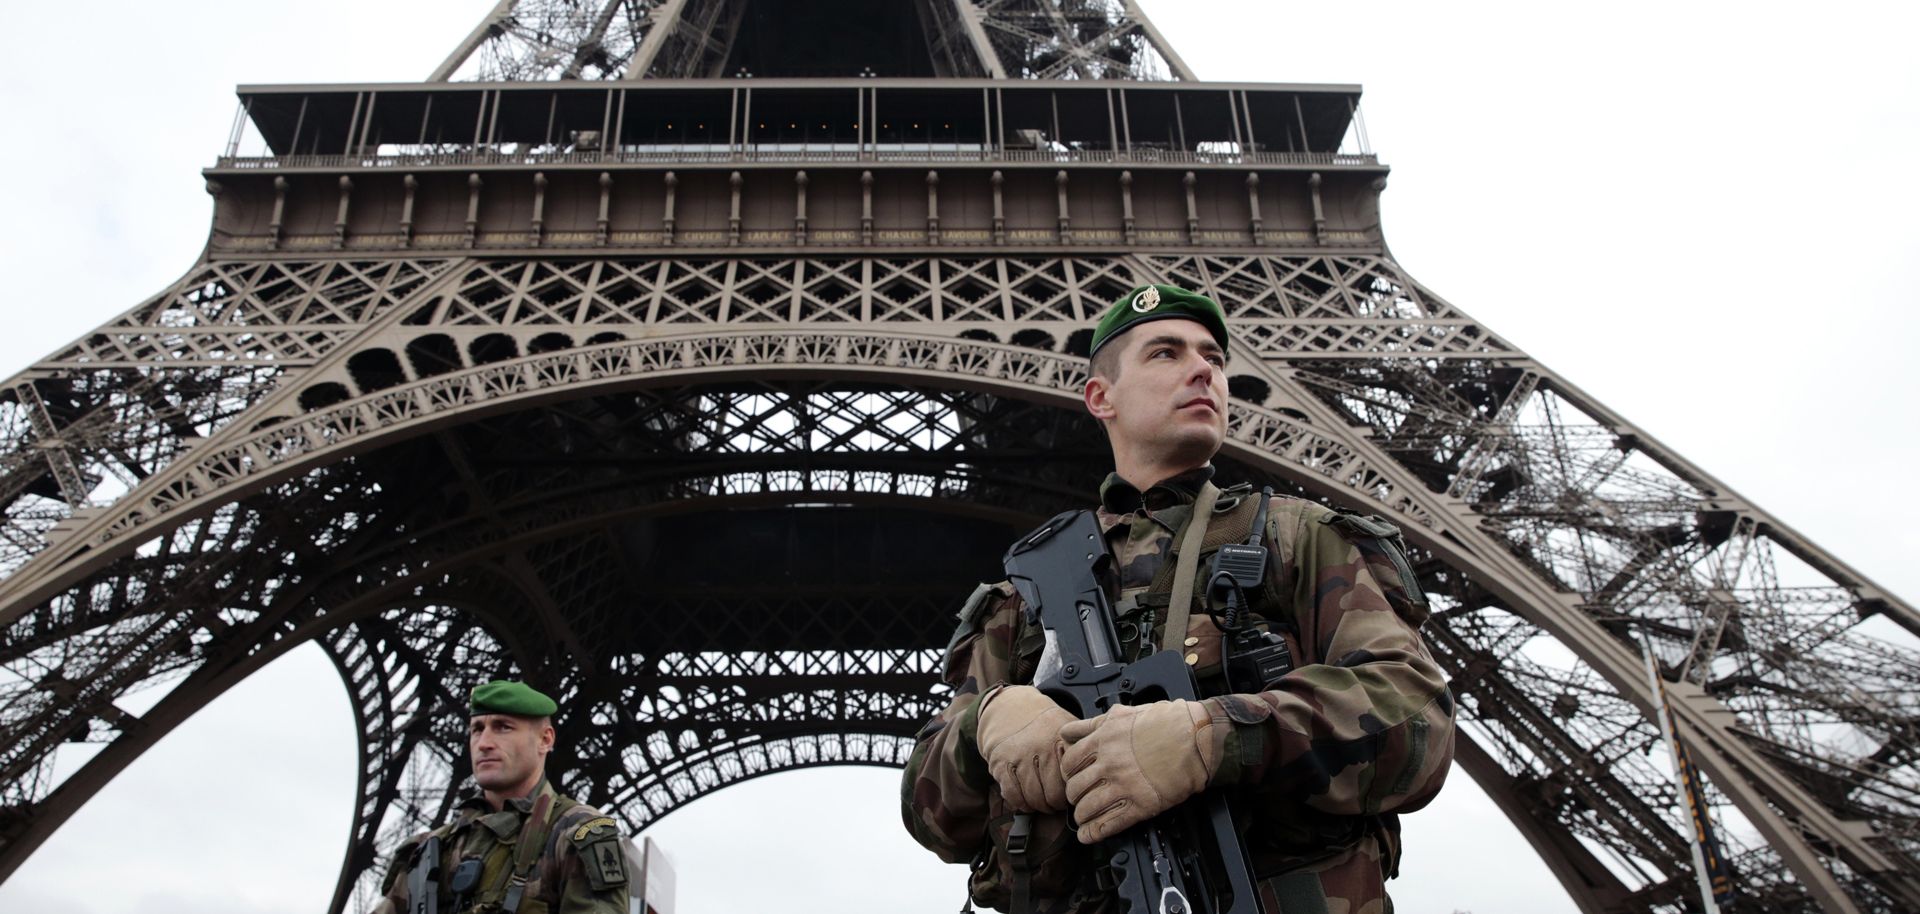 French soldiers patrol in front of the Eiffel Tower on Jan. 7, 2015 in Paris.